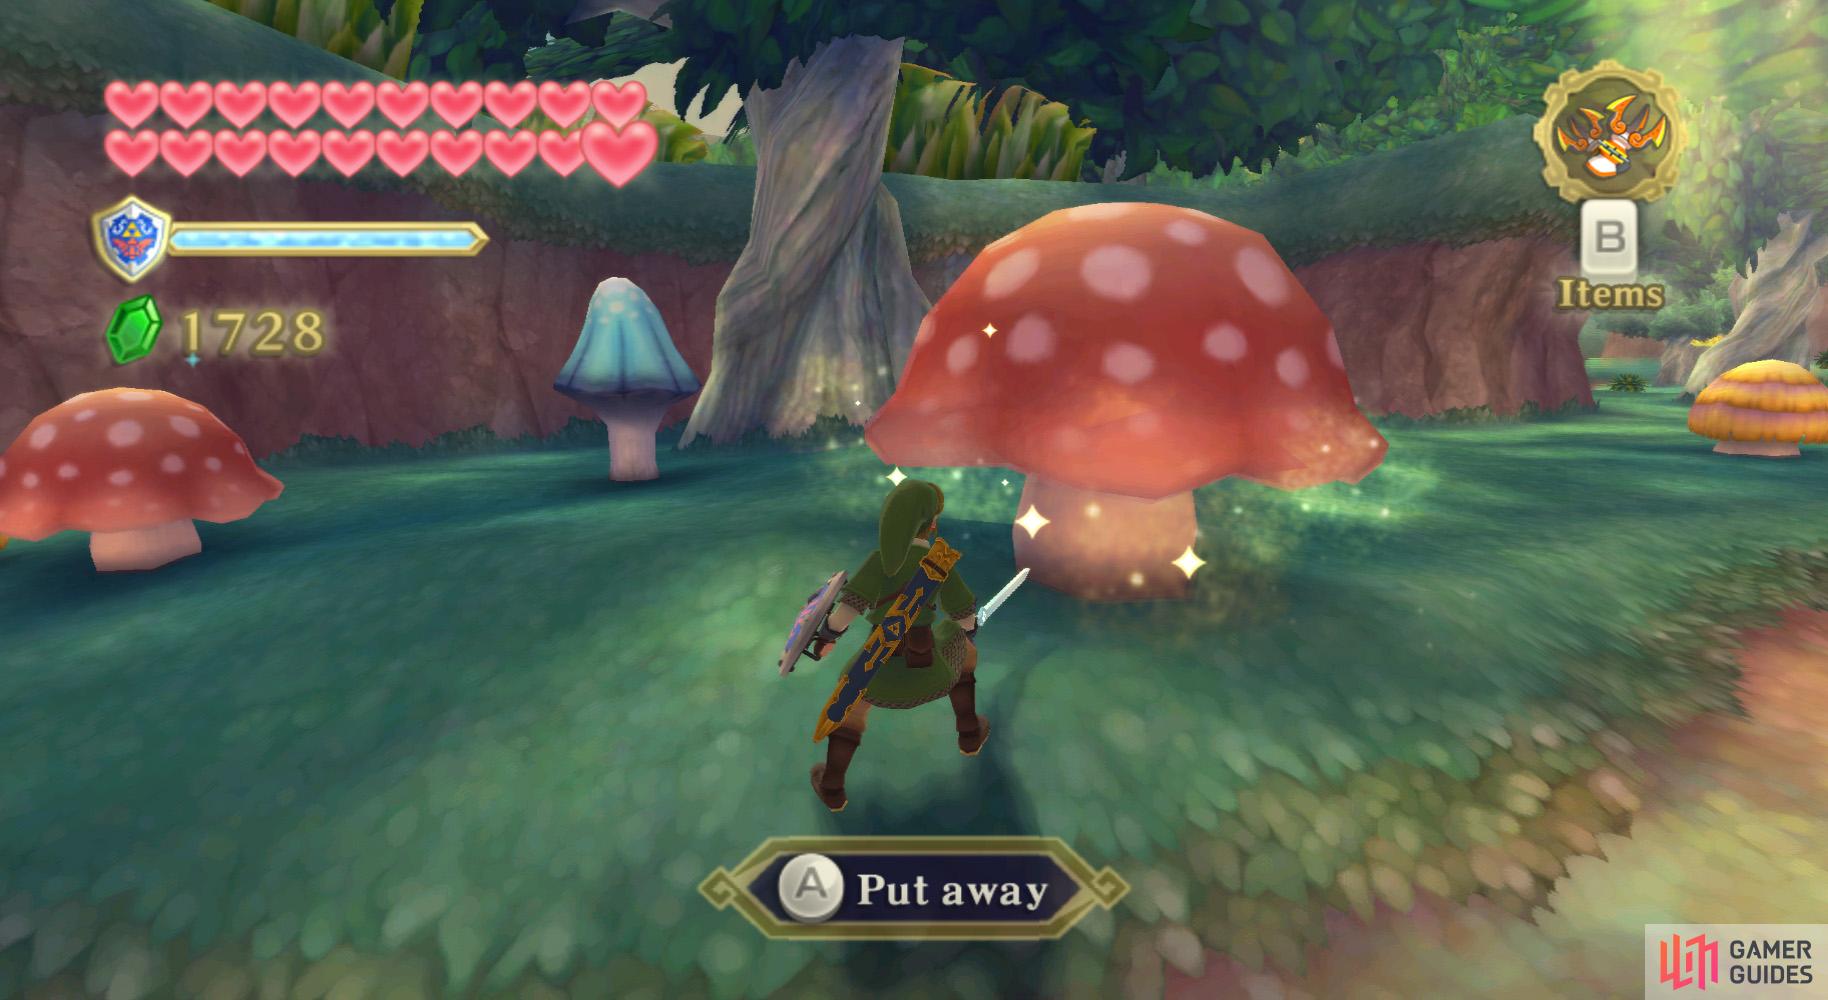 When you see a sparkling mushroom, poke it with your sword to dislodge its spores.